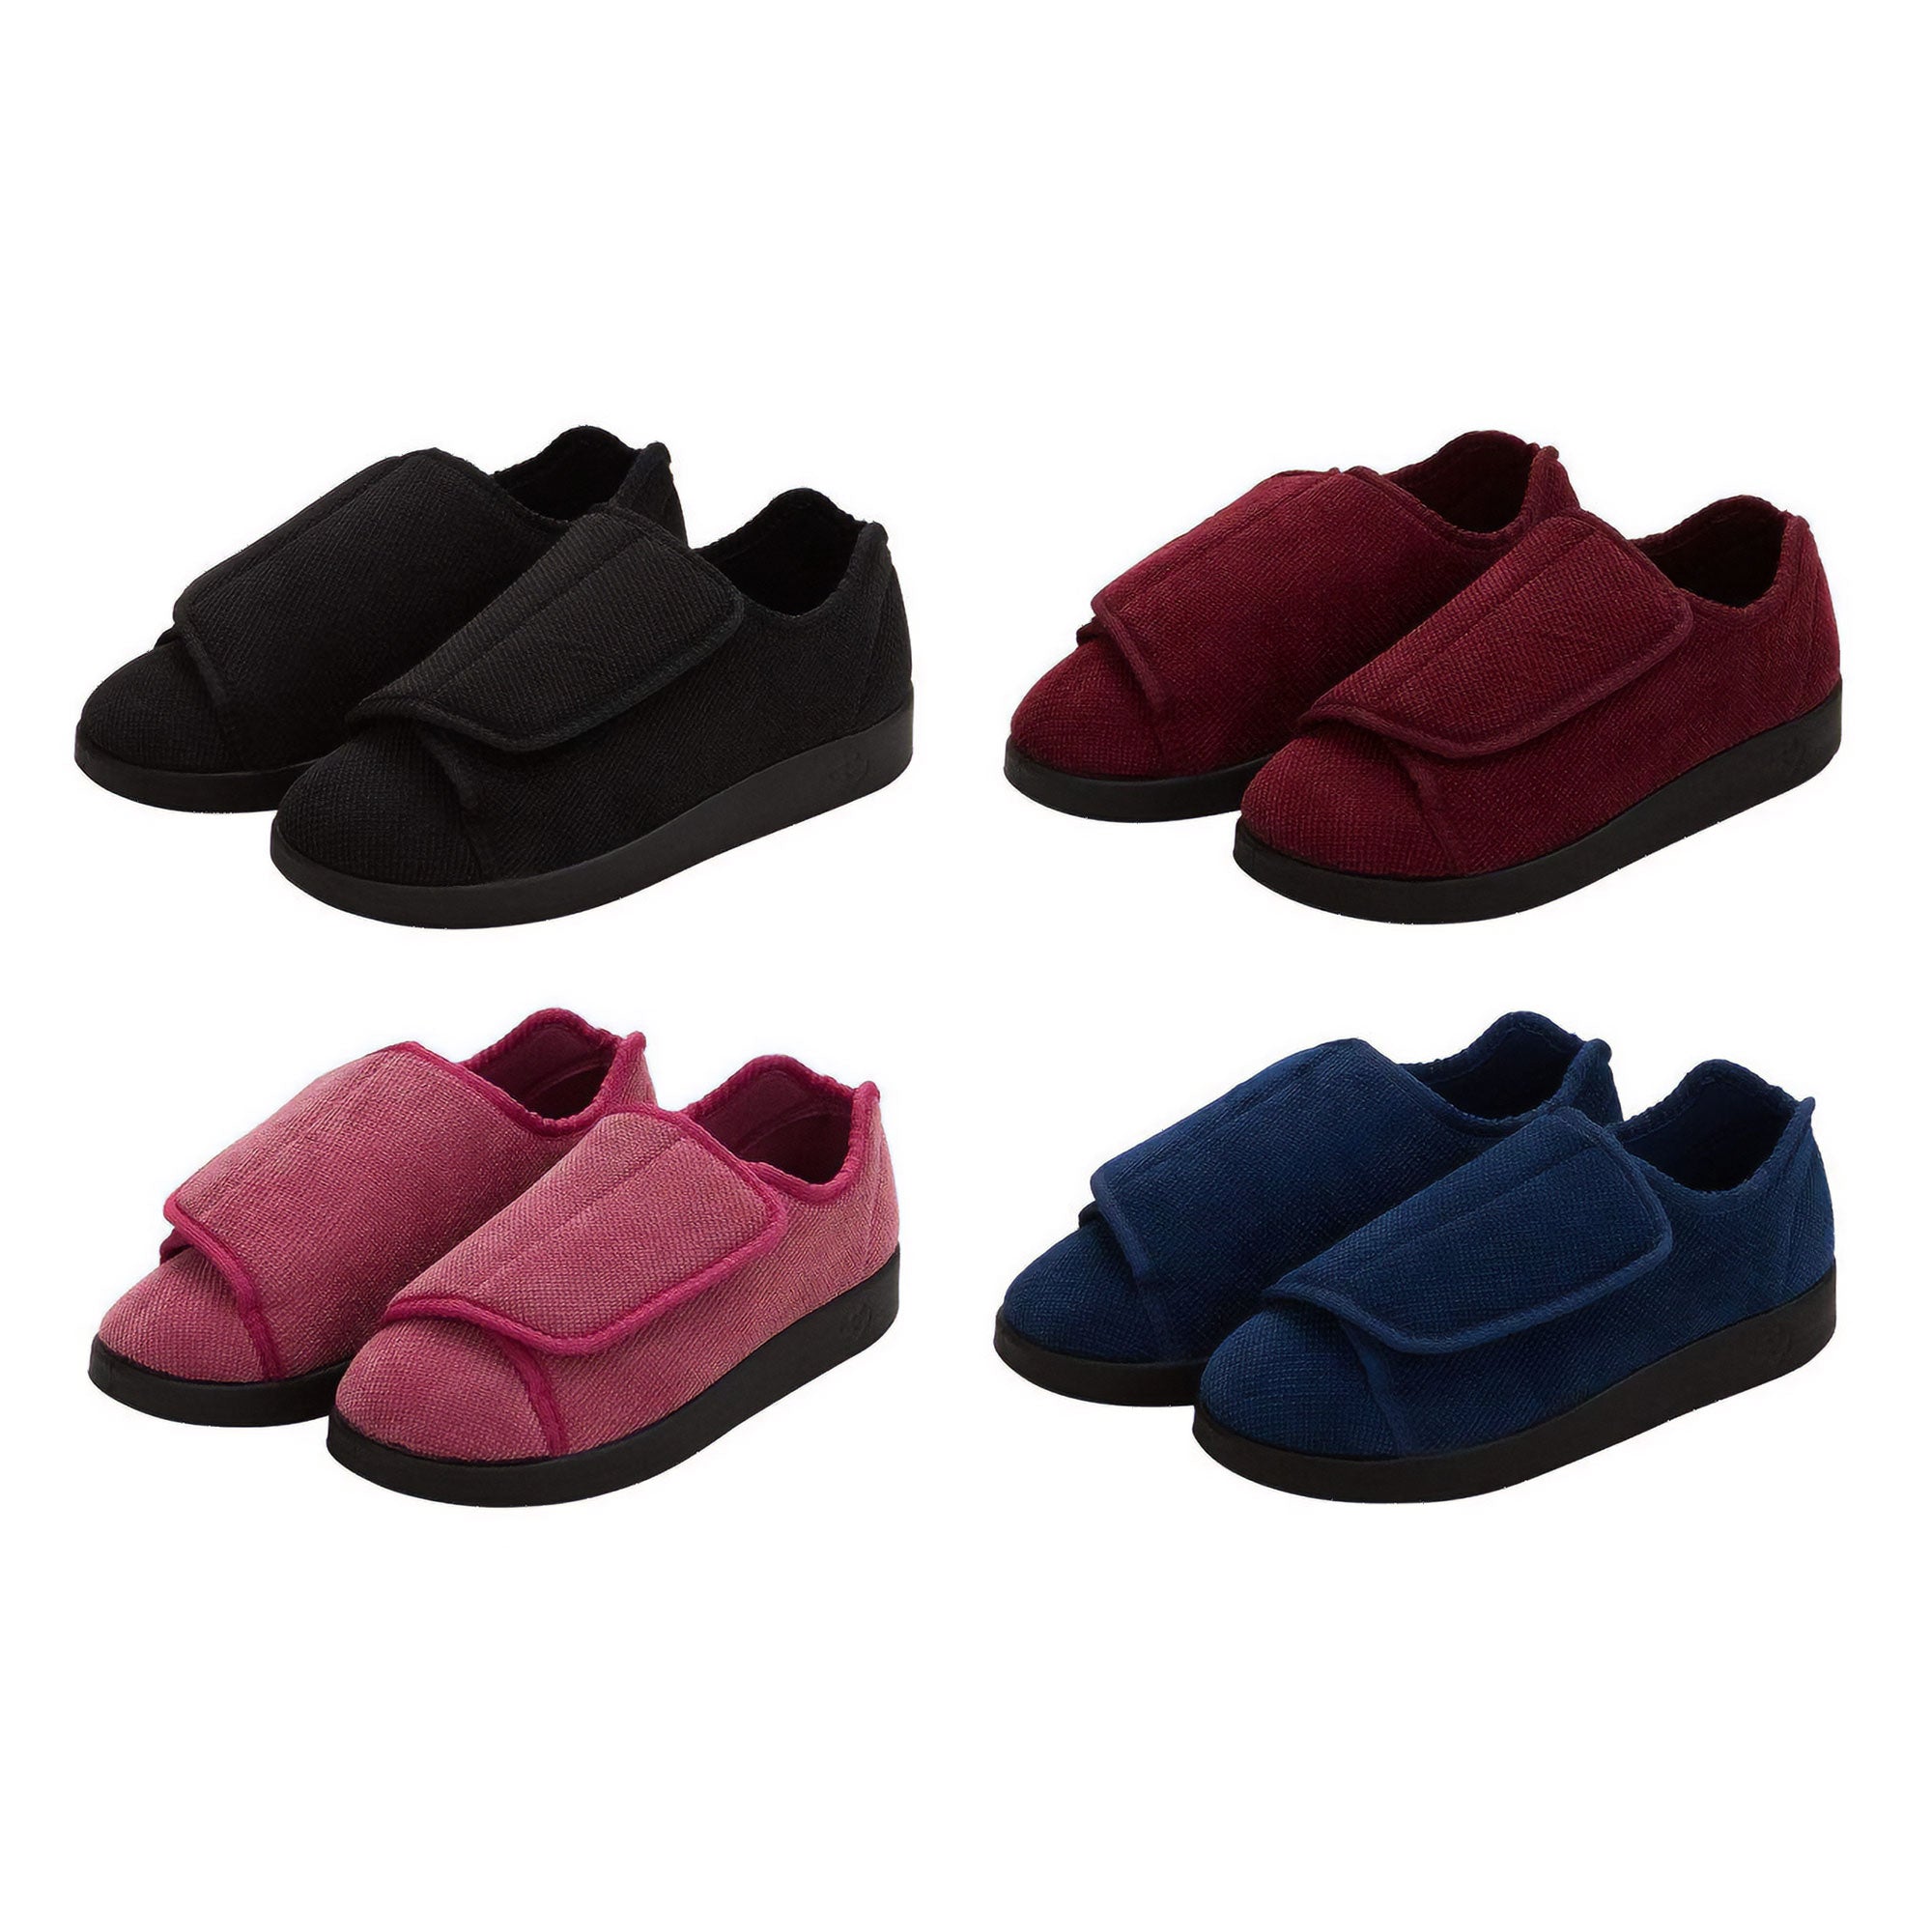 Silverts Women's Antimicrobial Extra Extra Wide Easy-Closure Slippers - Wine - 12